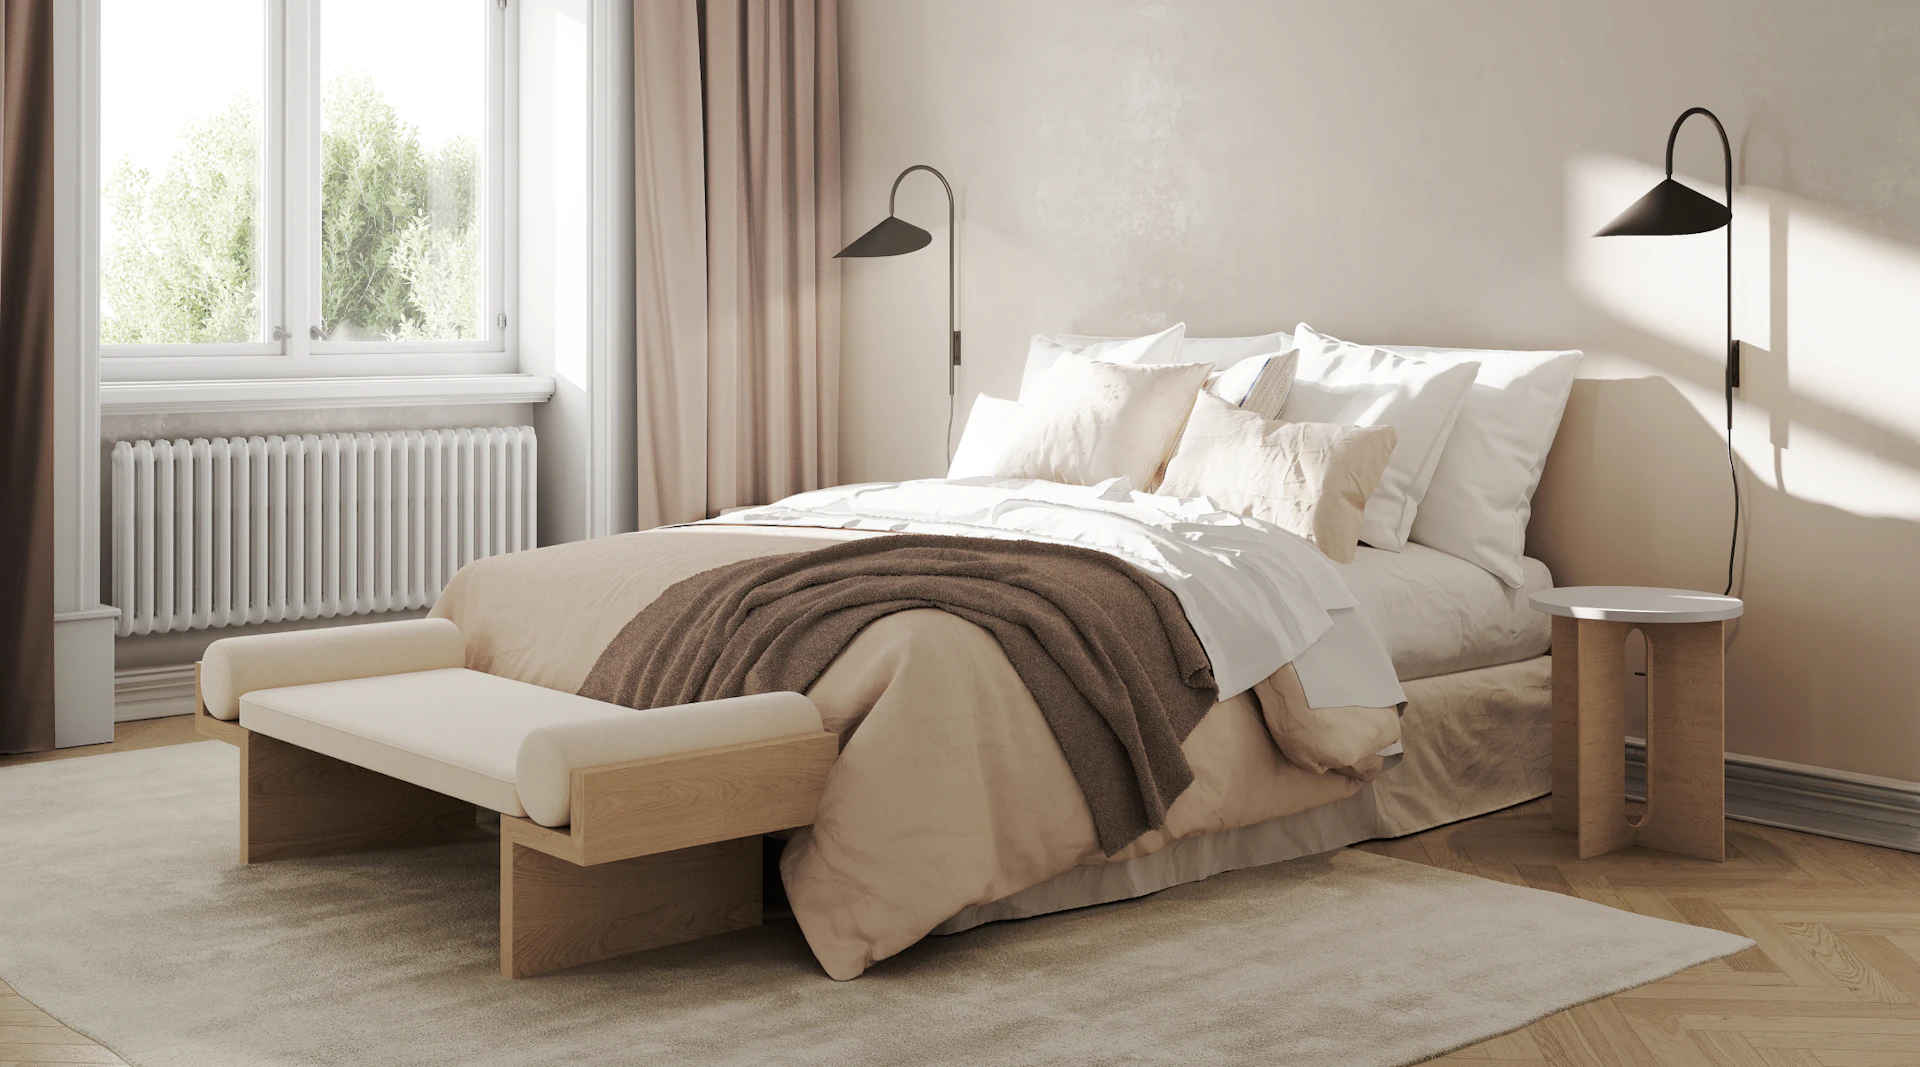 A bench is used to hide an adjustable bed base.